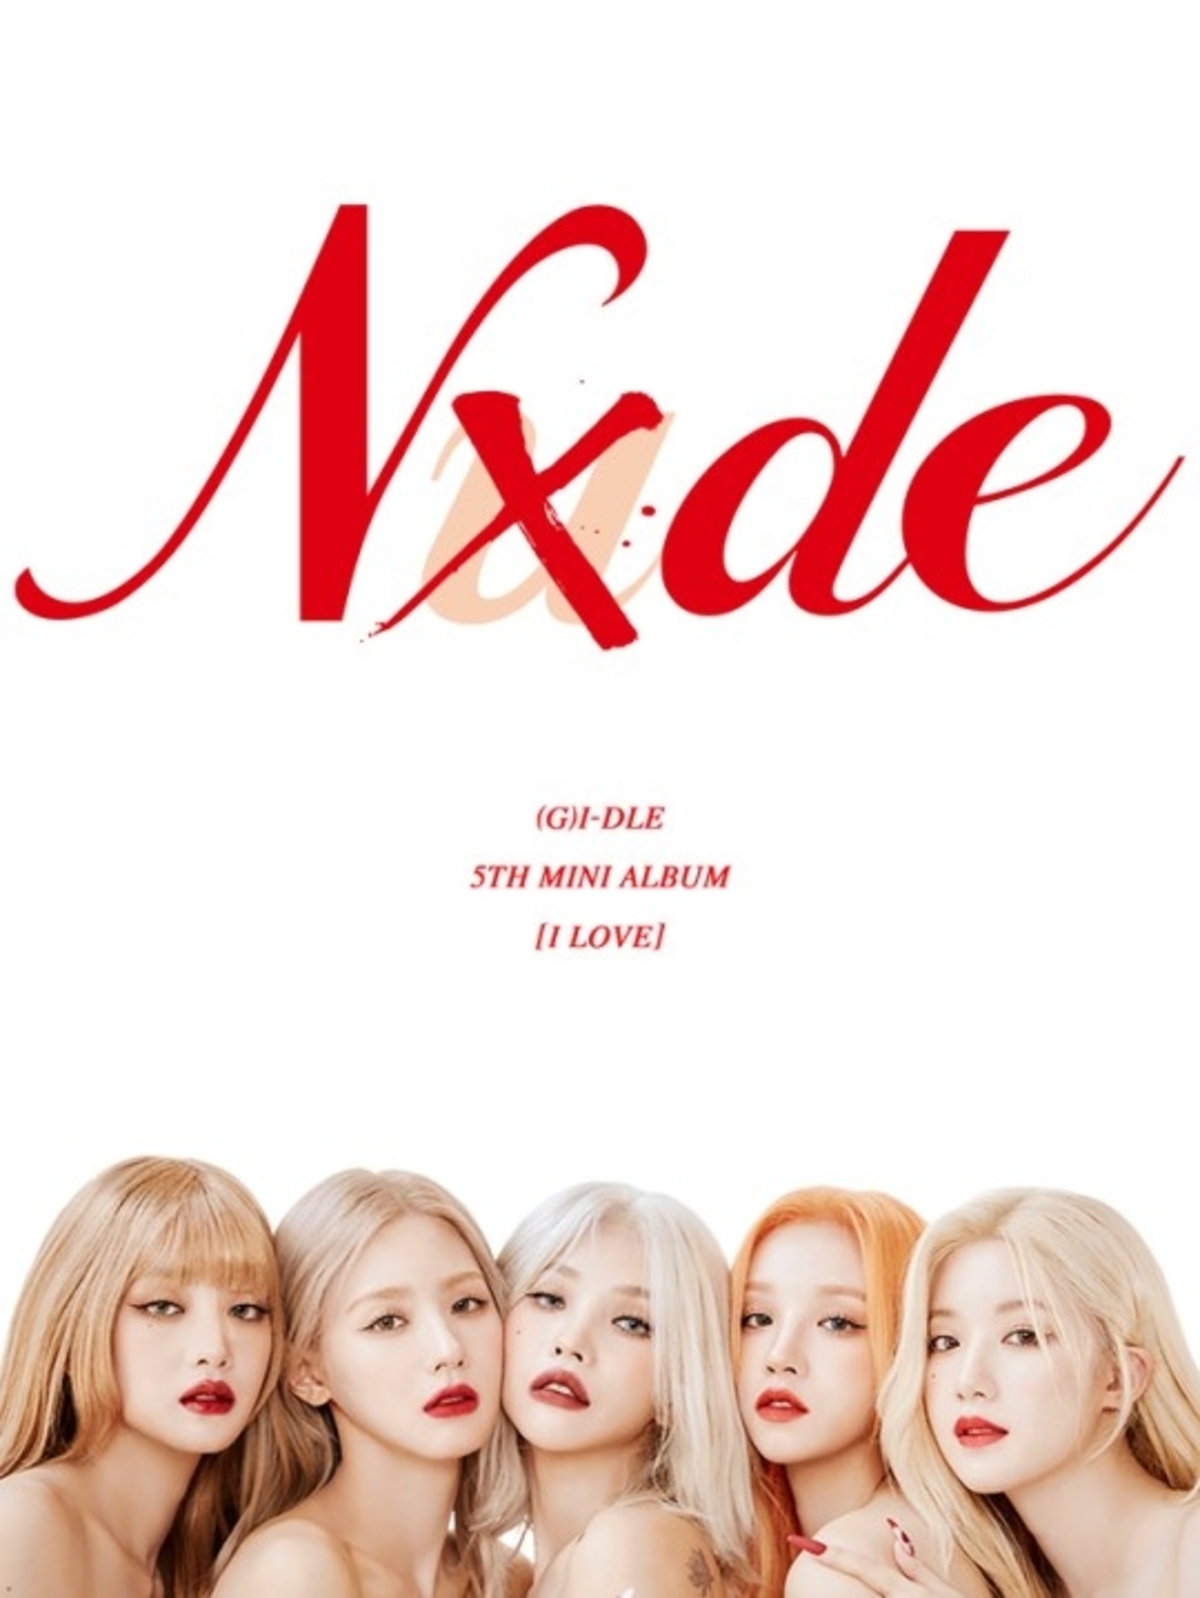 G)I-DLE アイドゥル nxde I LOVE サノク トレカ ソヨン - CD